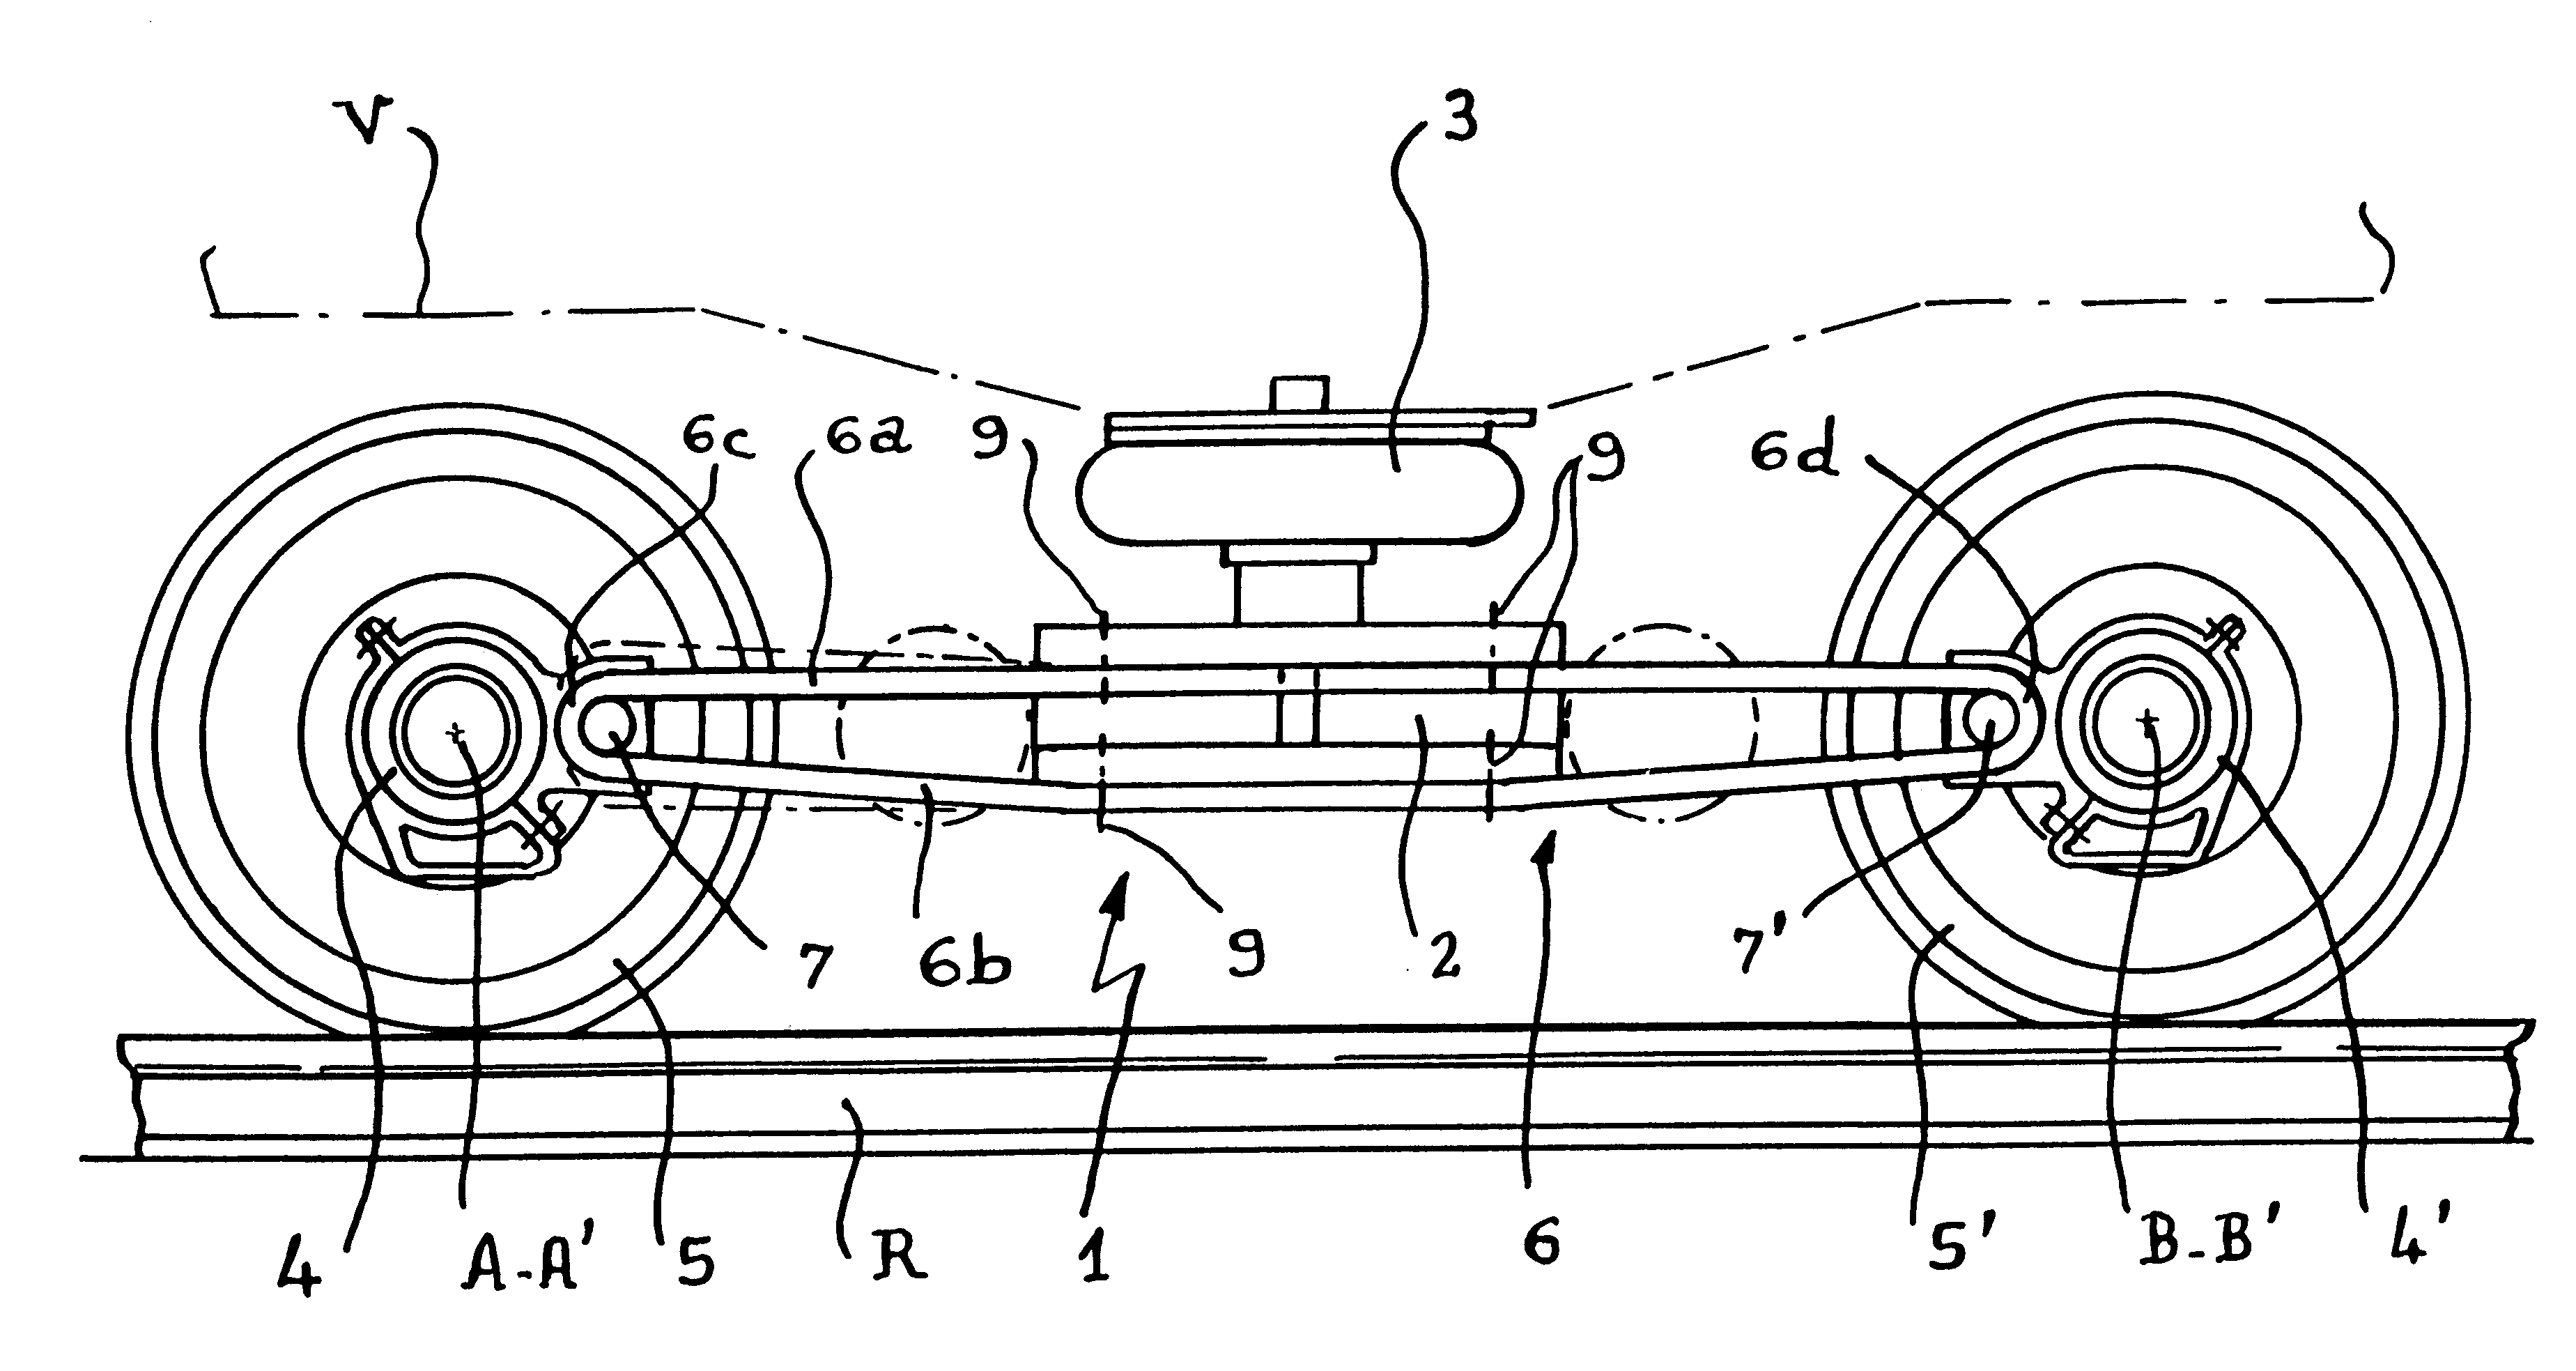 Railway vehicle bogie and process for manufacturing a side member of such a bogie